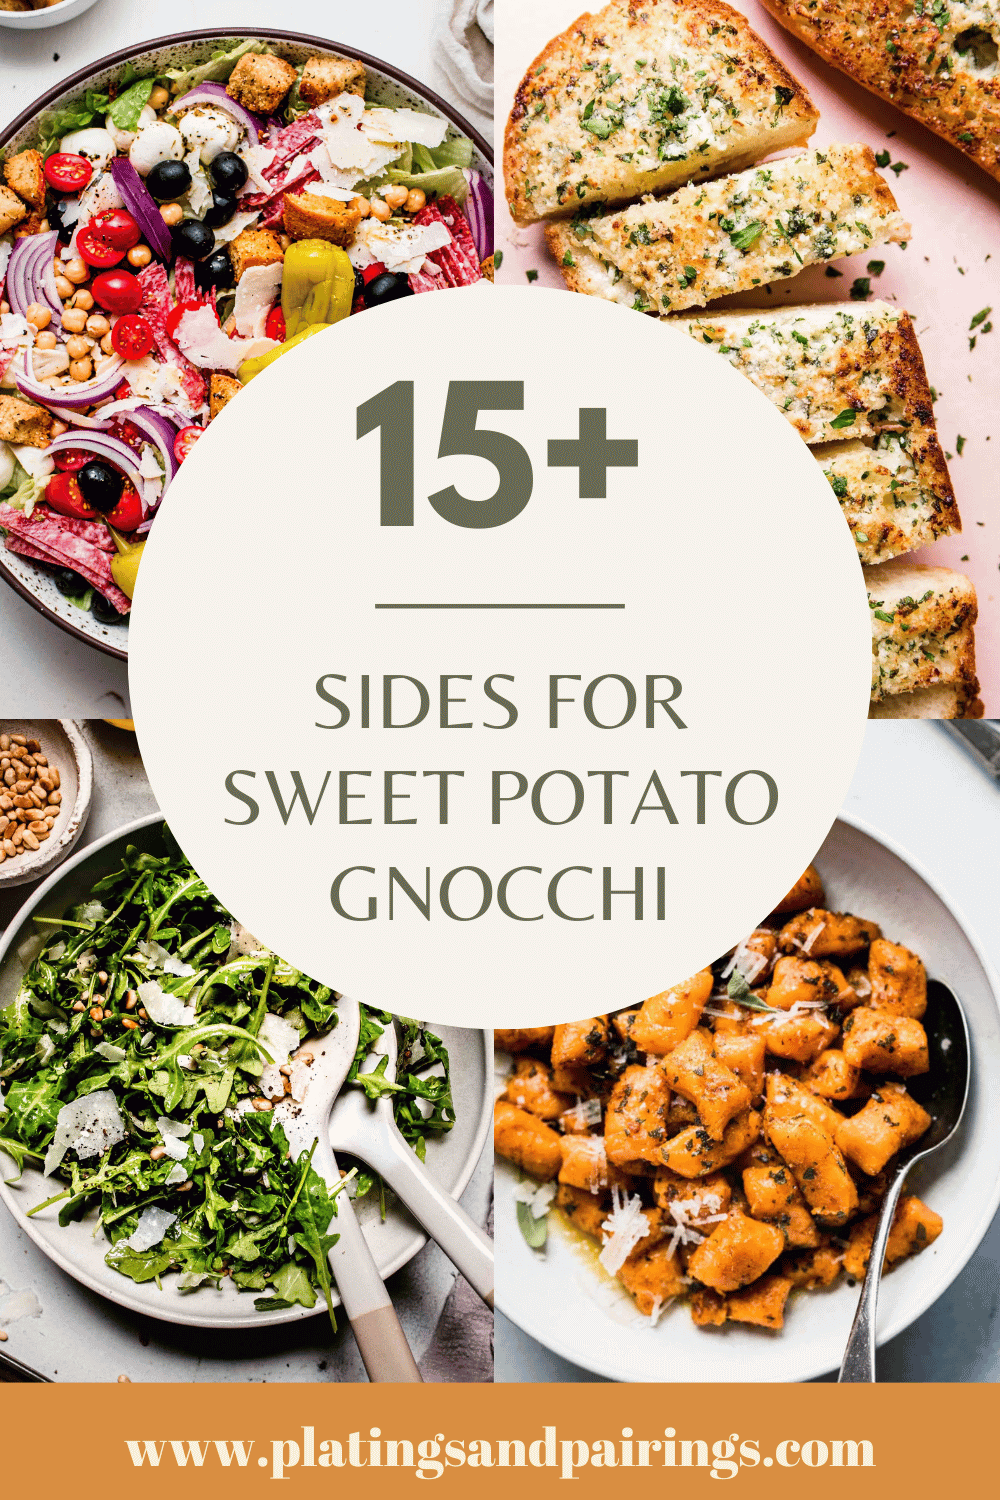 Collage of side dishes for sweet potato gnocchi with text overlay.